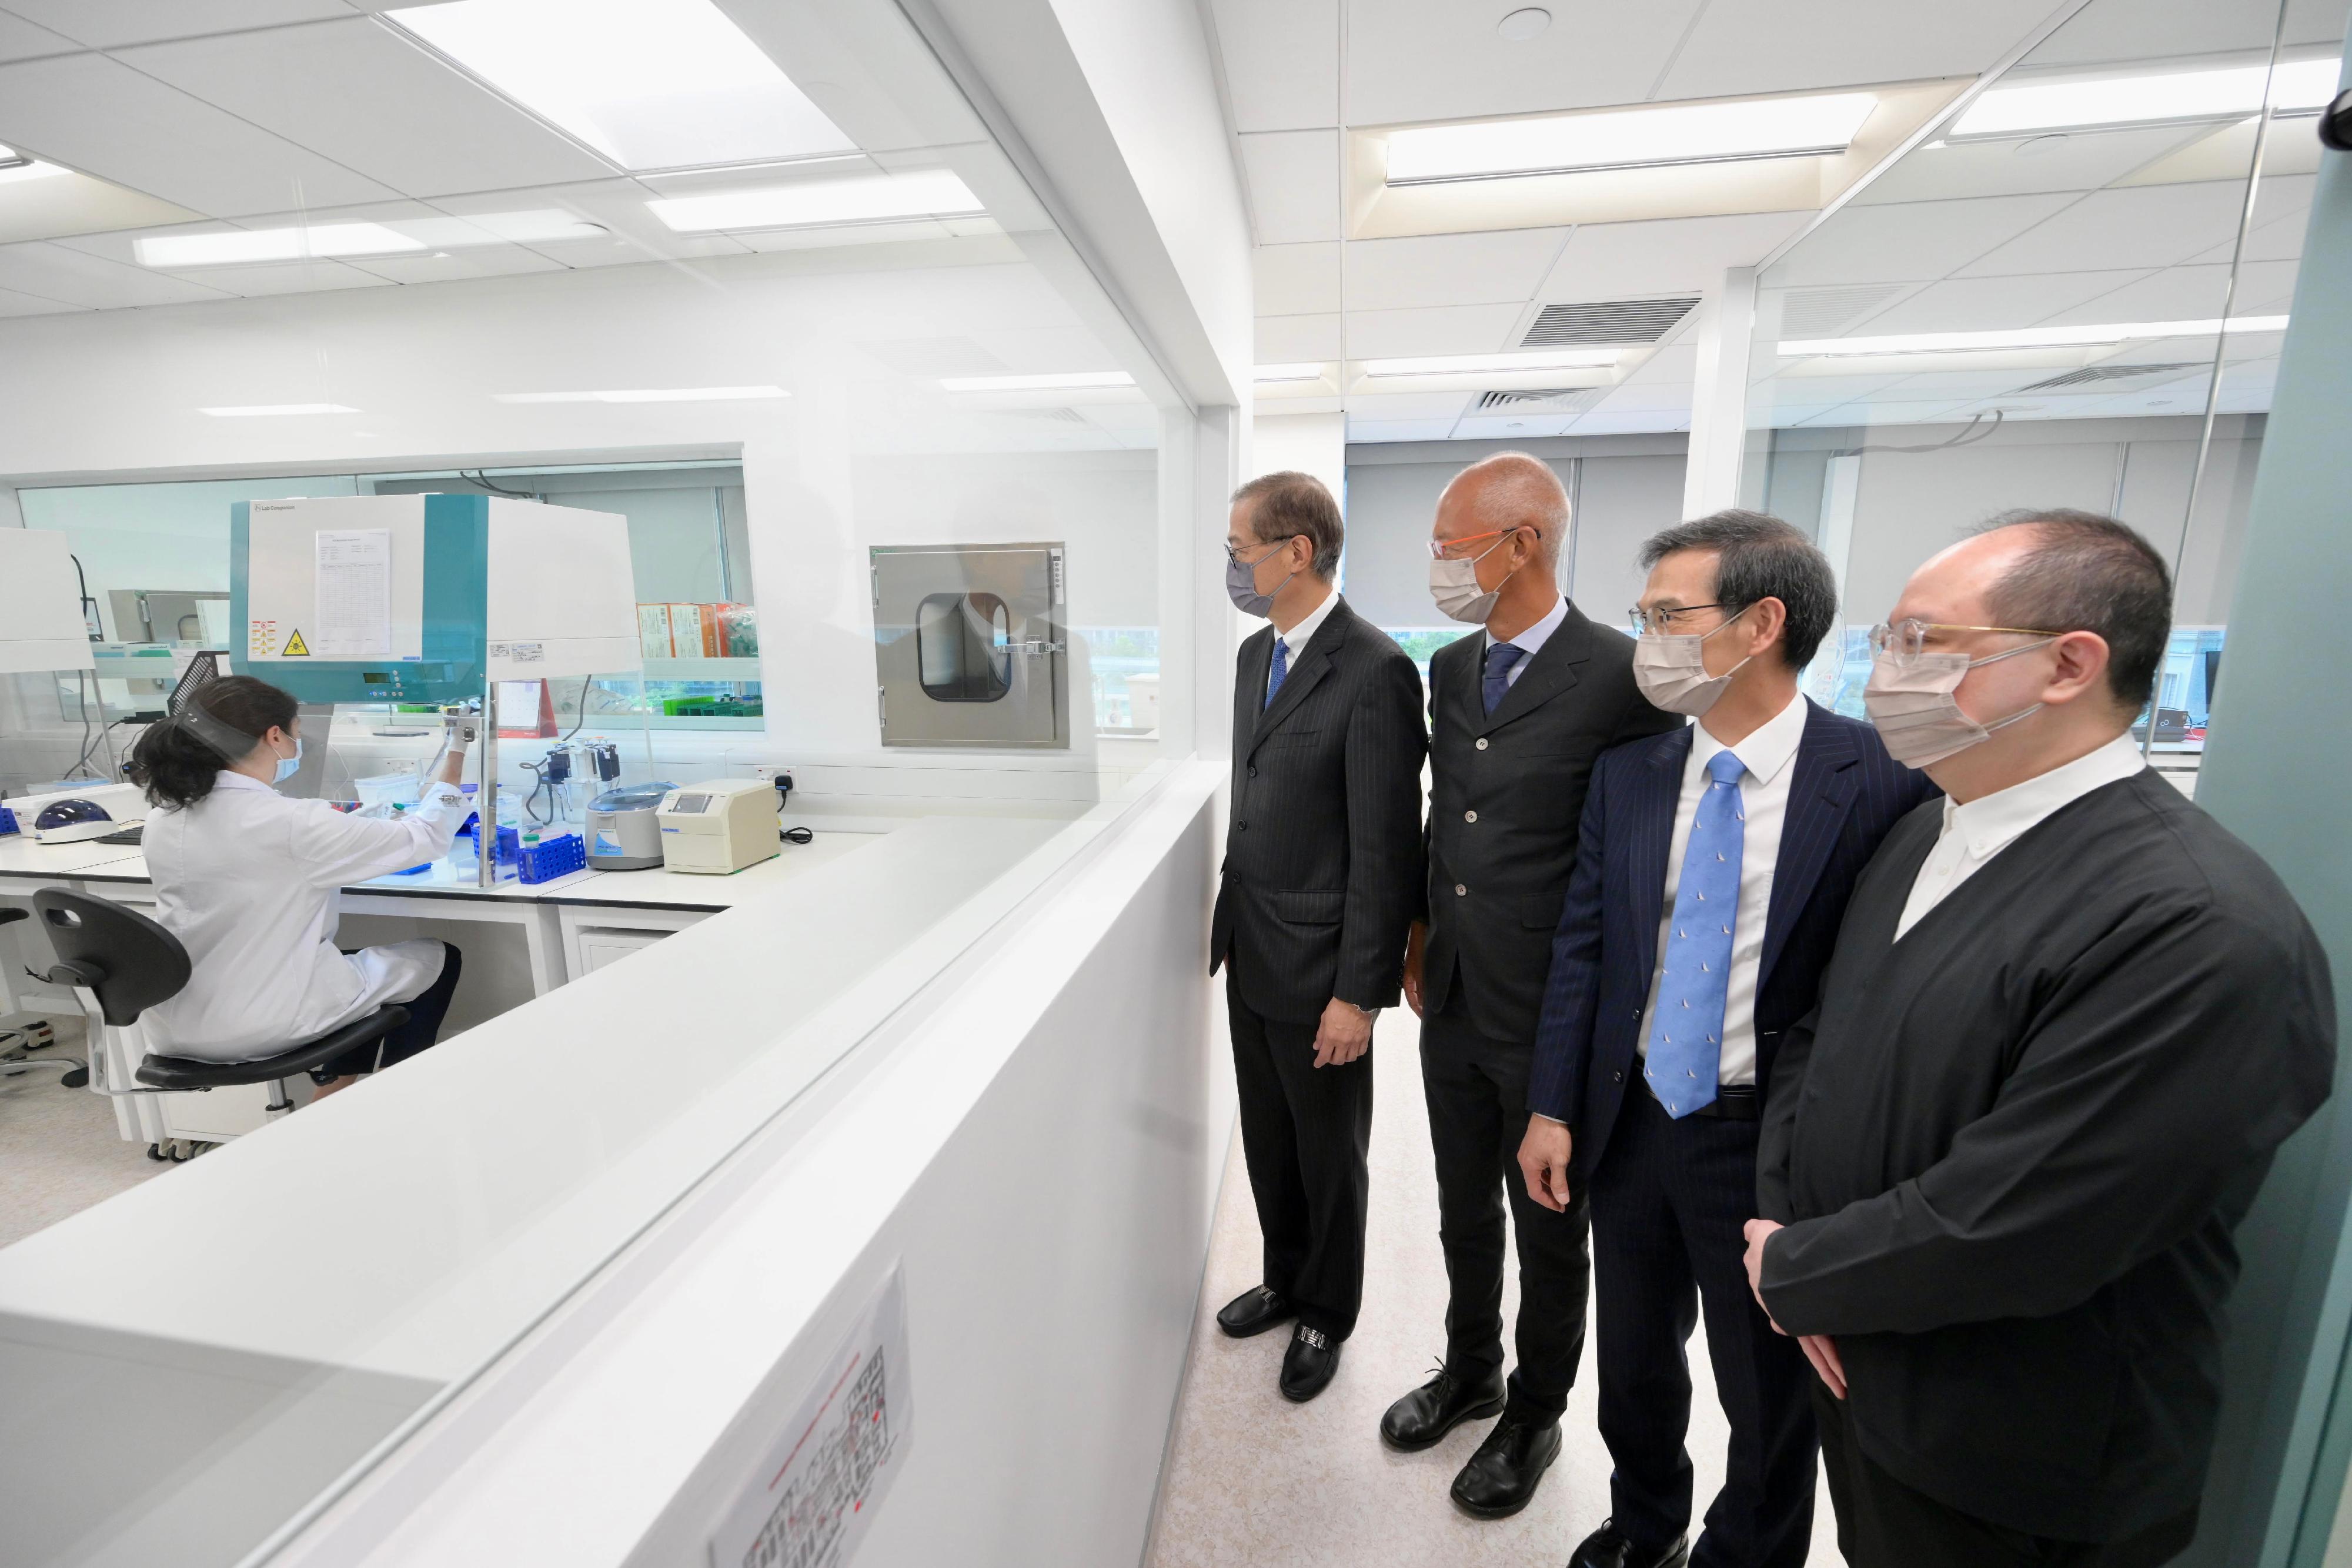 The Secretary for Health, Professor Lo Chung-mau (fourth right), today (August 9) toured the laboratory of the Hong Kong Genome Institute (HKGI) in the company of the Chairperson of the HKGI, Mr Philip Tsai (third right); the Deputy Chairperson of the HKGI, Professor Raymond Liang (first right); and the Chief Executive Officer of the HKGI, Dr Lo Su-vui (second right).